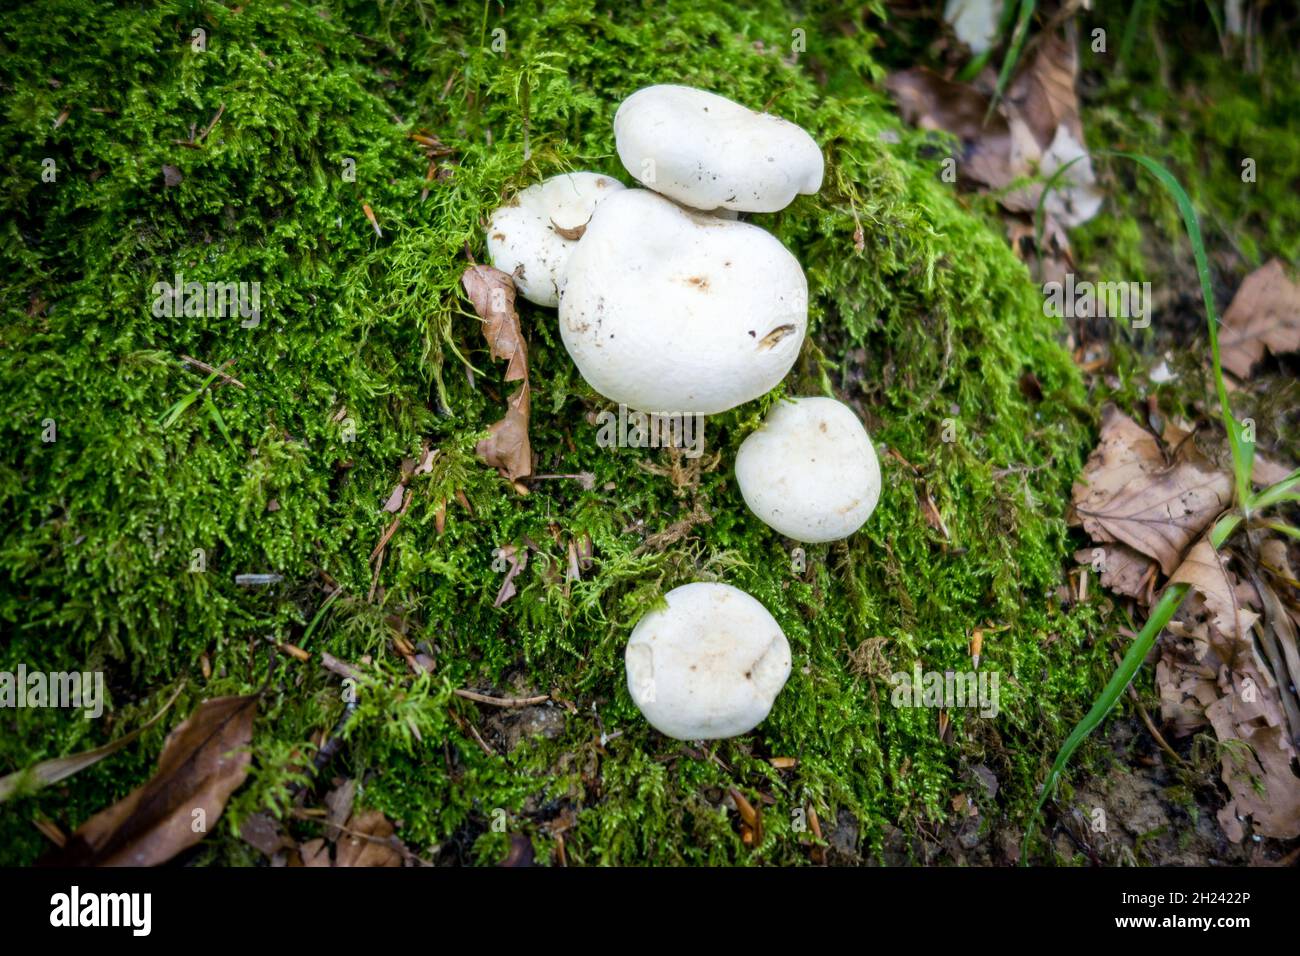 Mushroom closeup view in a mountain forest. Haute Savoie, France Stock Photo